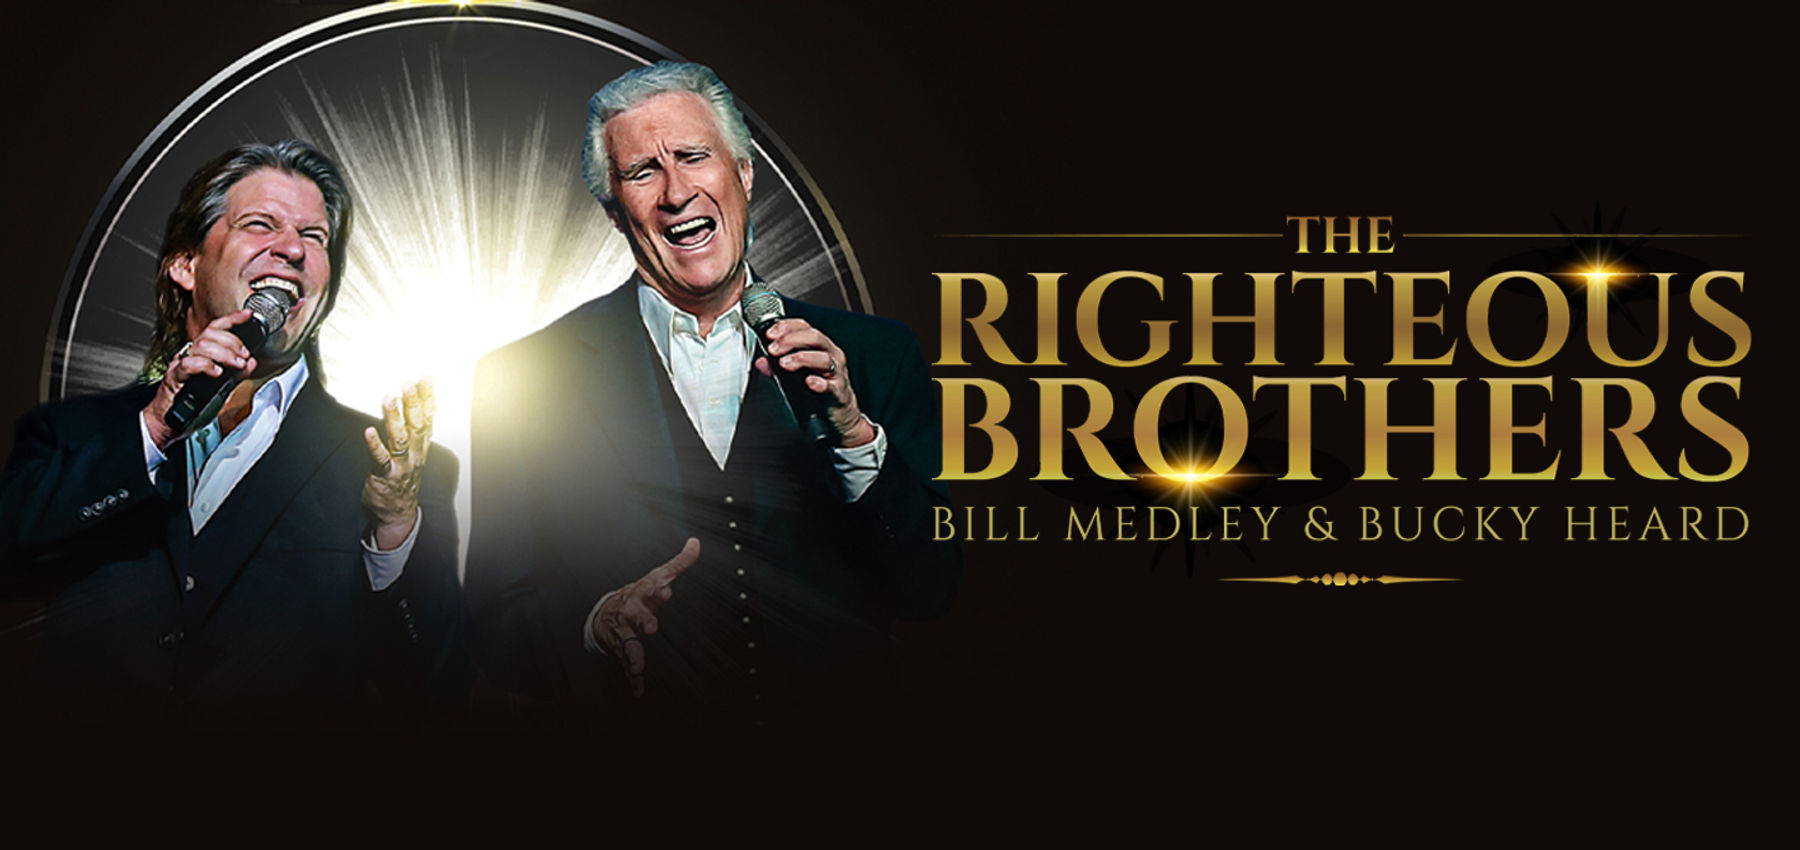 The Righteous Brothers Bill Medley And Bucky Heard Downtown Nashville 4265